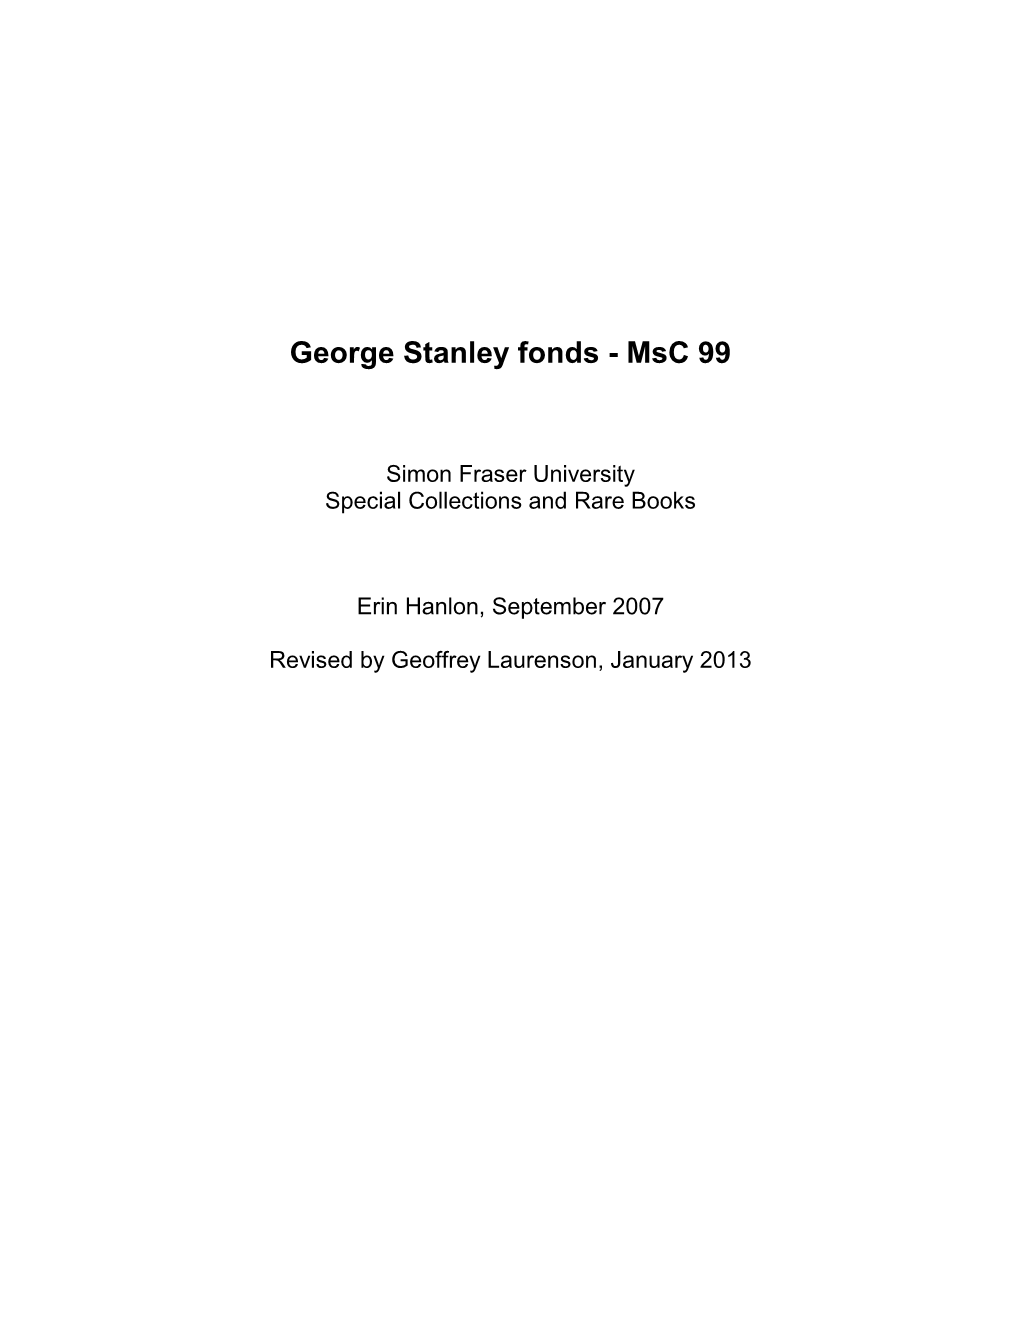 The George Stanley Fonds Was Received in August 2007